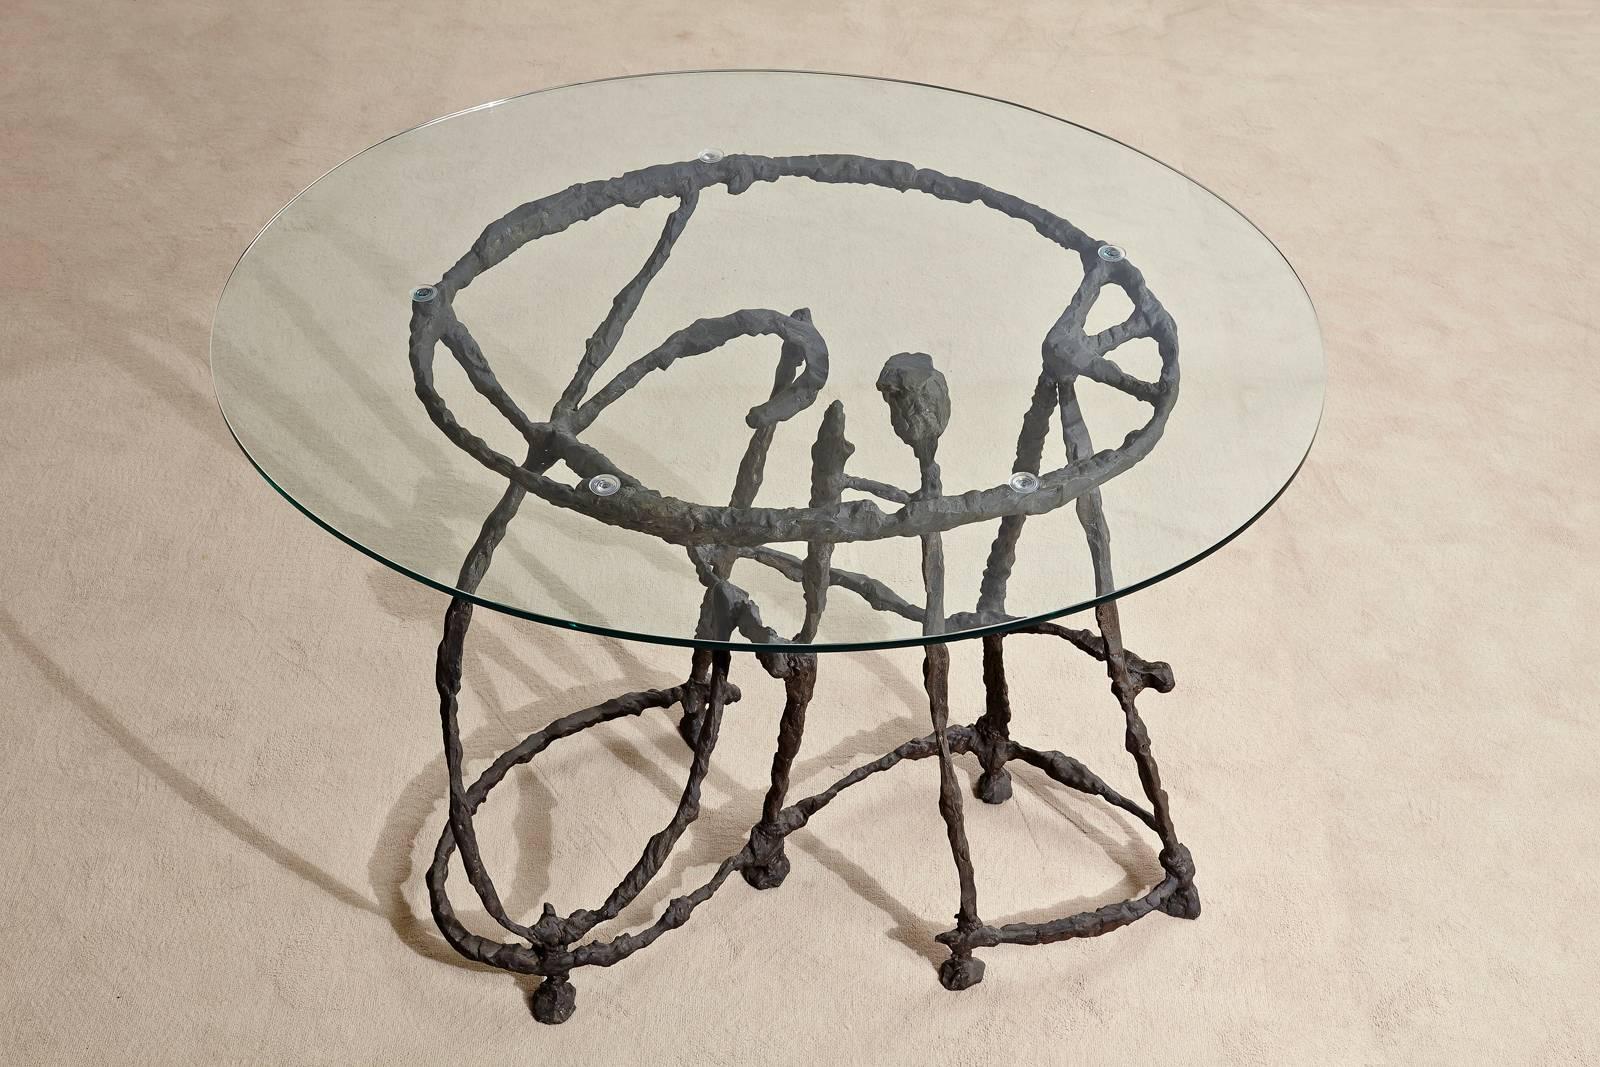 This table has a very sculptural base cast in bronze which contrasts with the sleek crystal top. 

The context:
The title of the project 